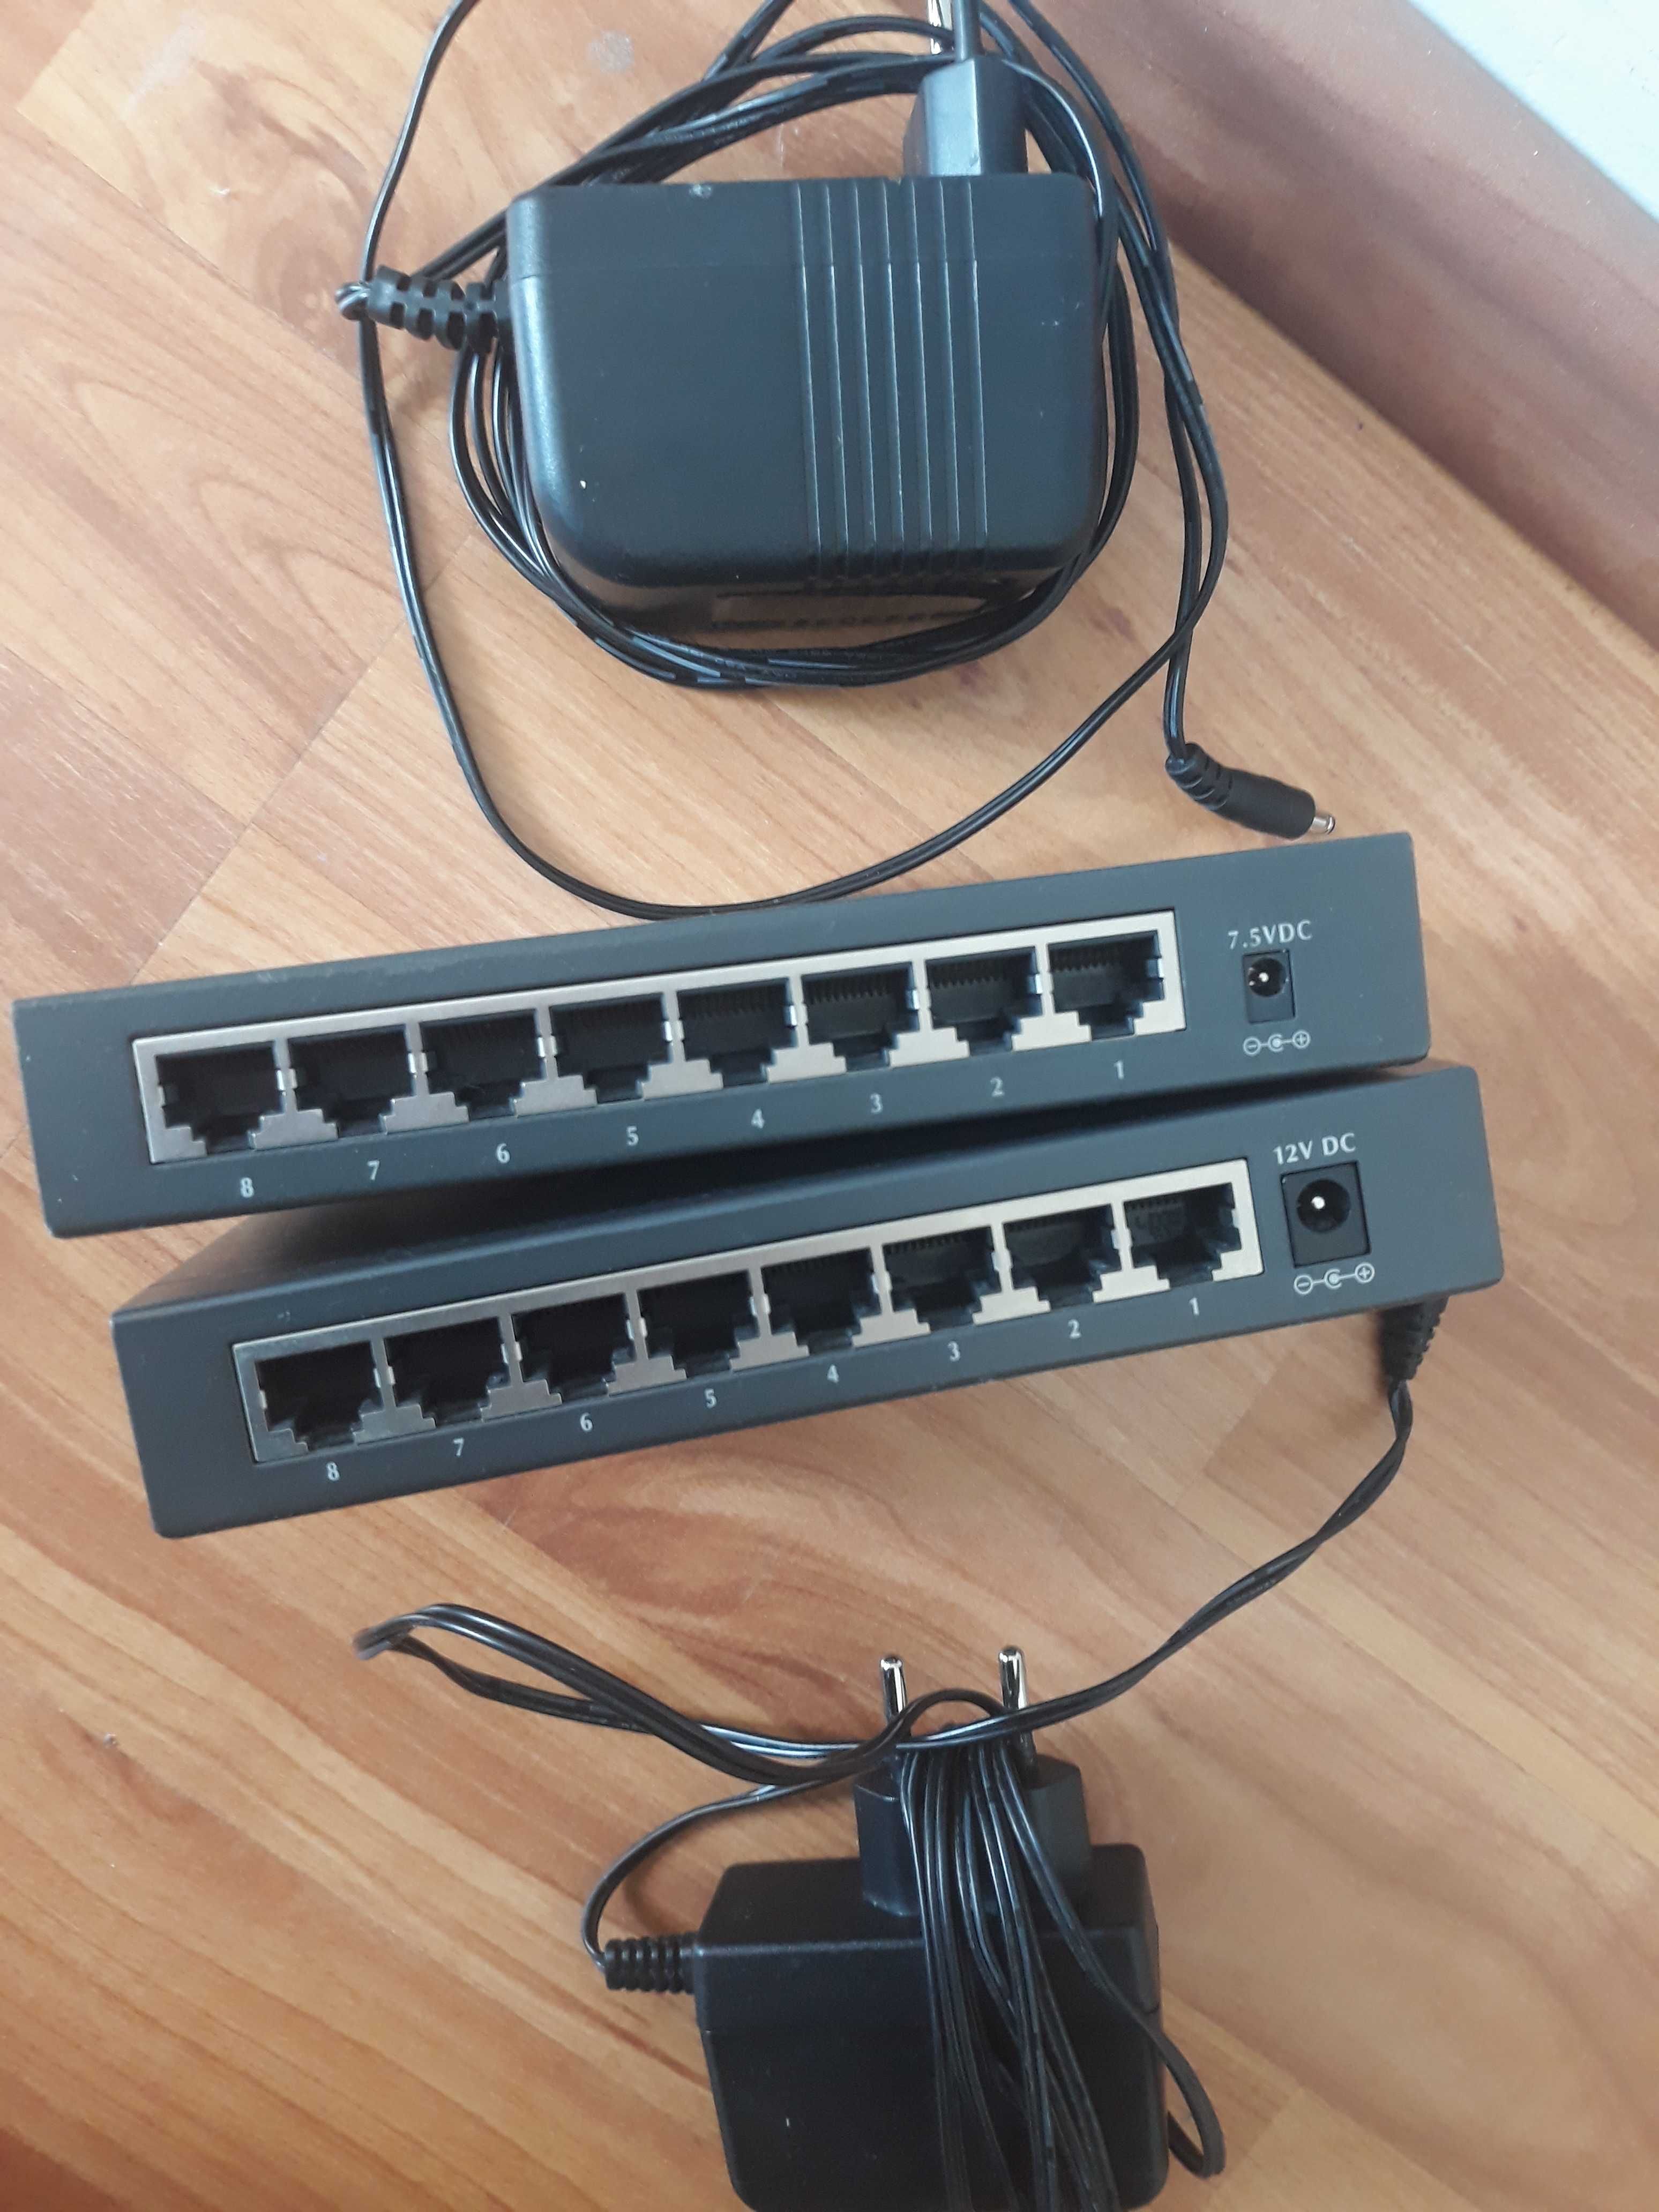 Vand planet ethernet switch fsd-803